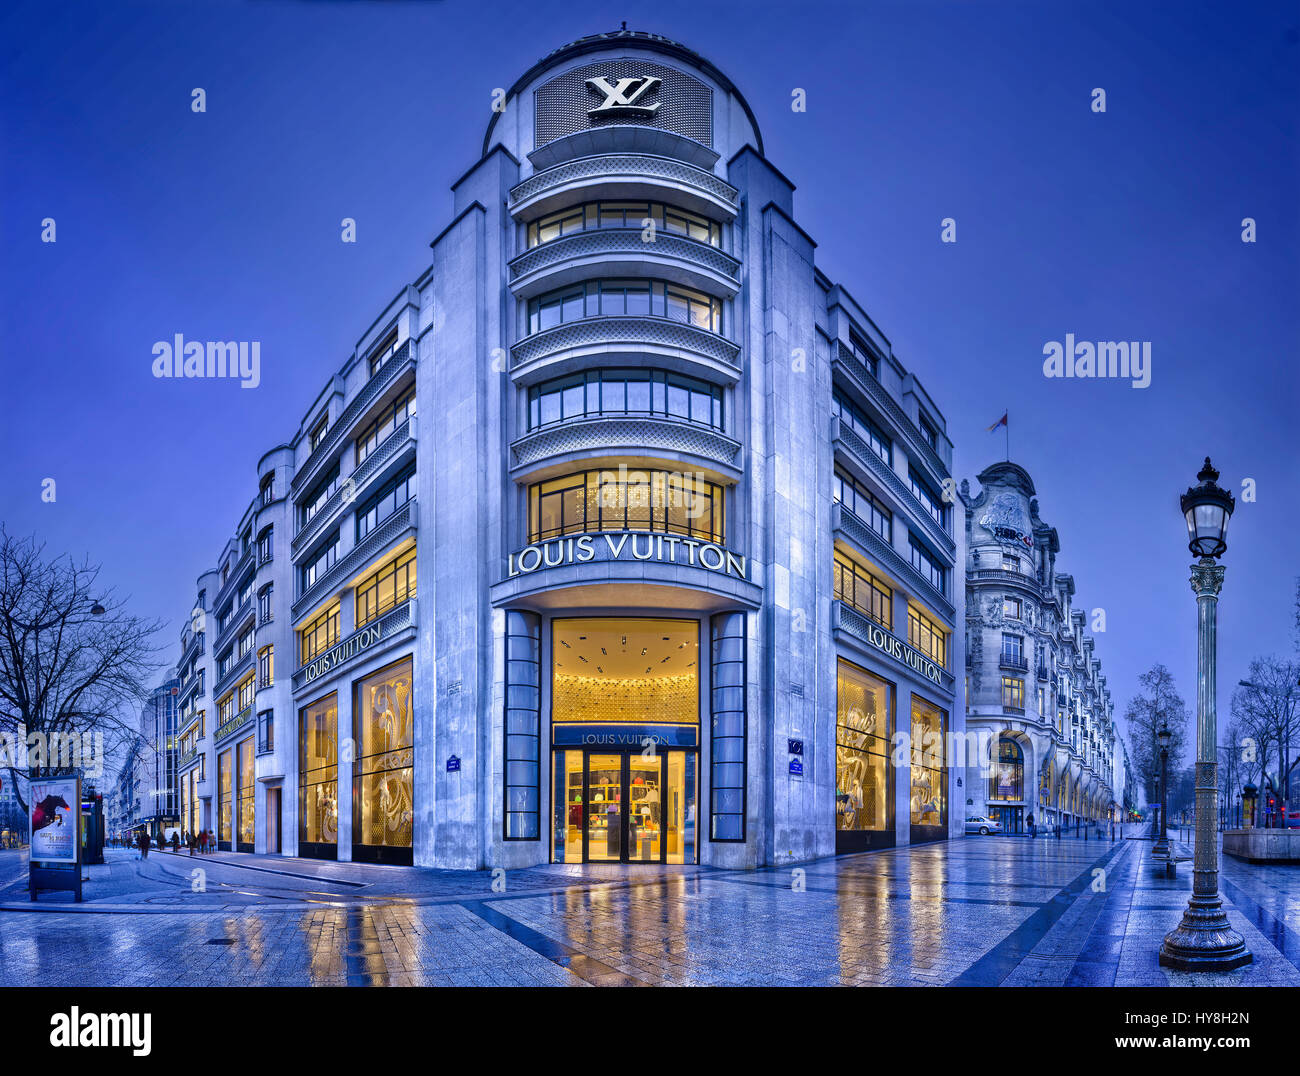 The Louis Vuitton retail store on the Champs Elysees in ...